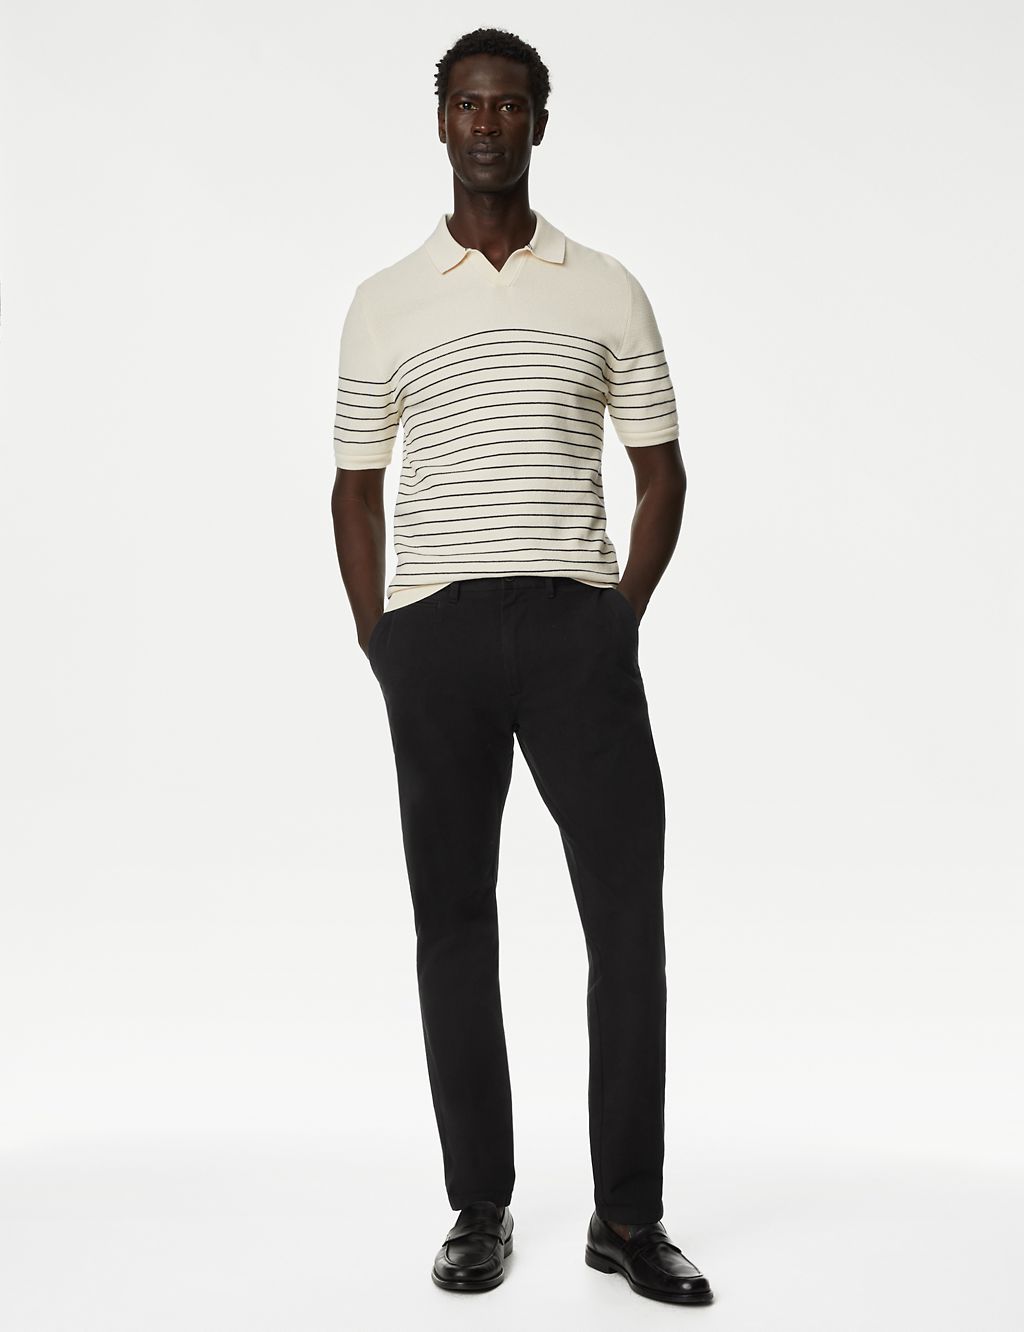 Slim Fit Ultimate Chinos 2 of 6